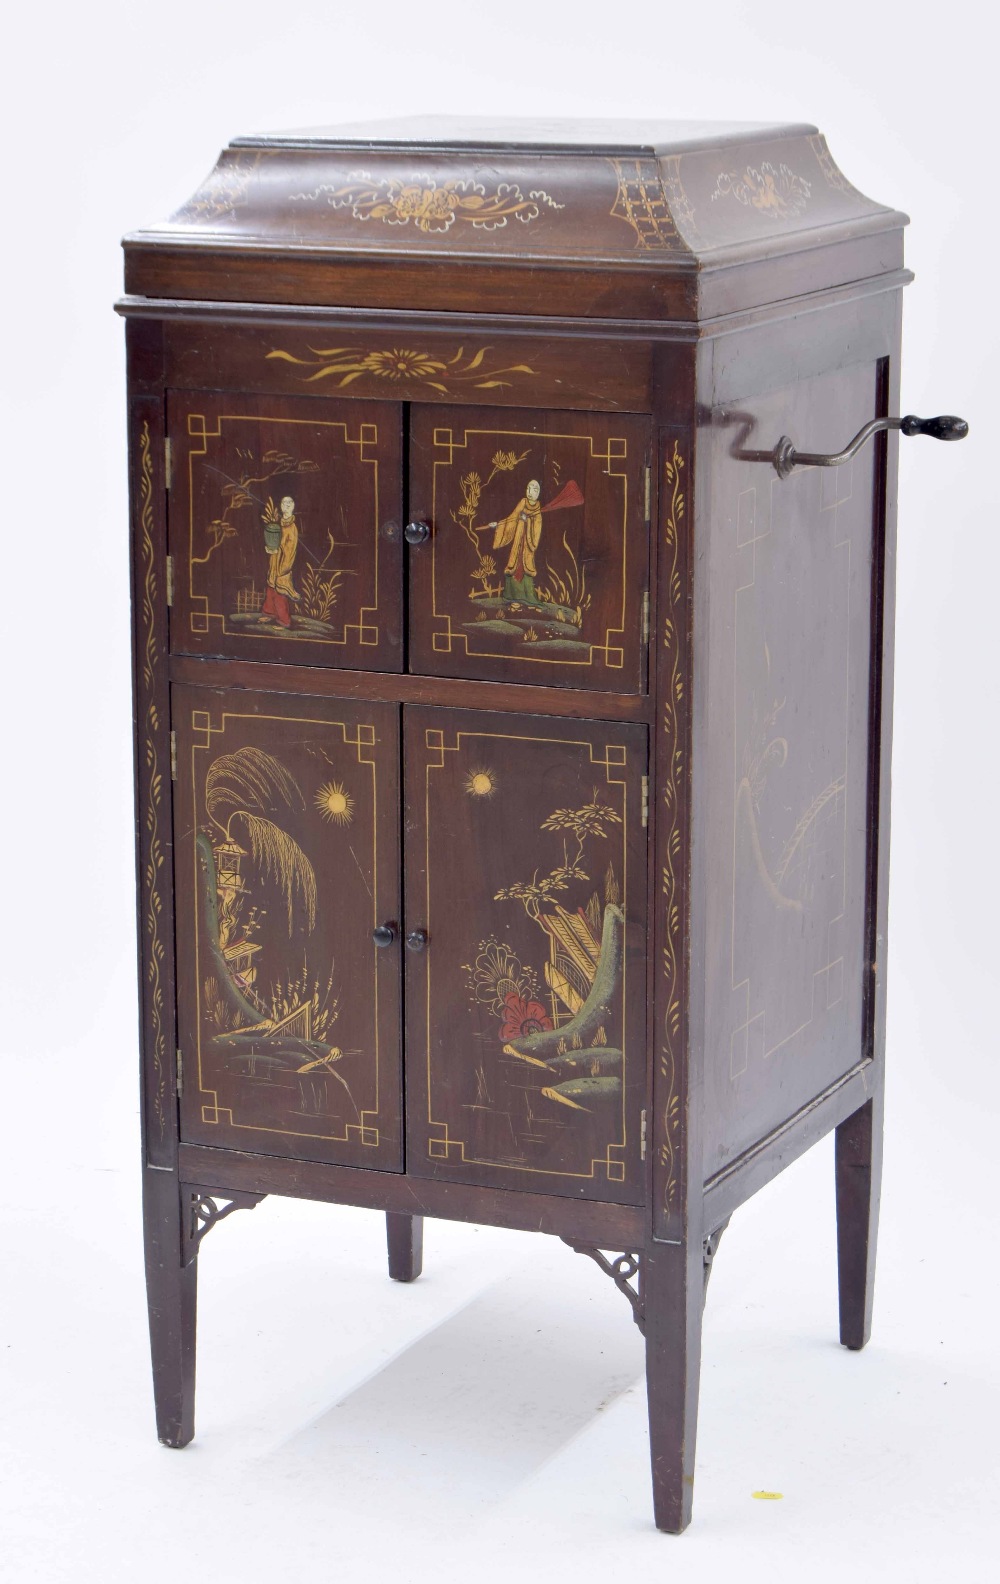 Vintage chinoiserie decorated cabinet gramophone, painted with garden scenes, bearing Brown & Son of - Image 5 of 5